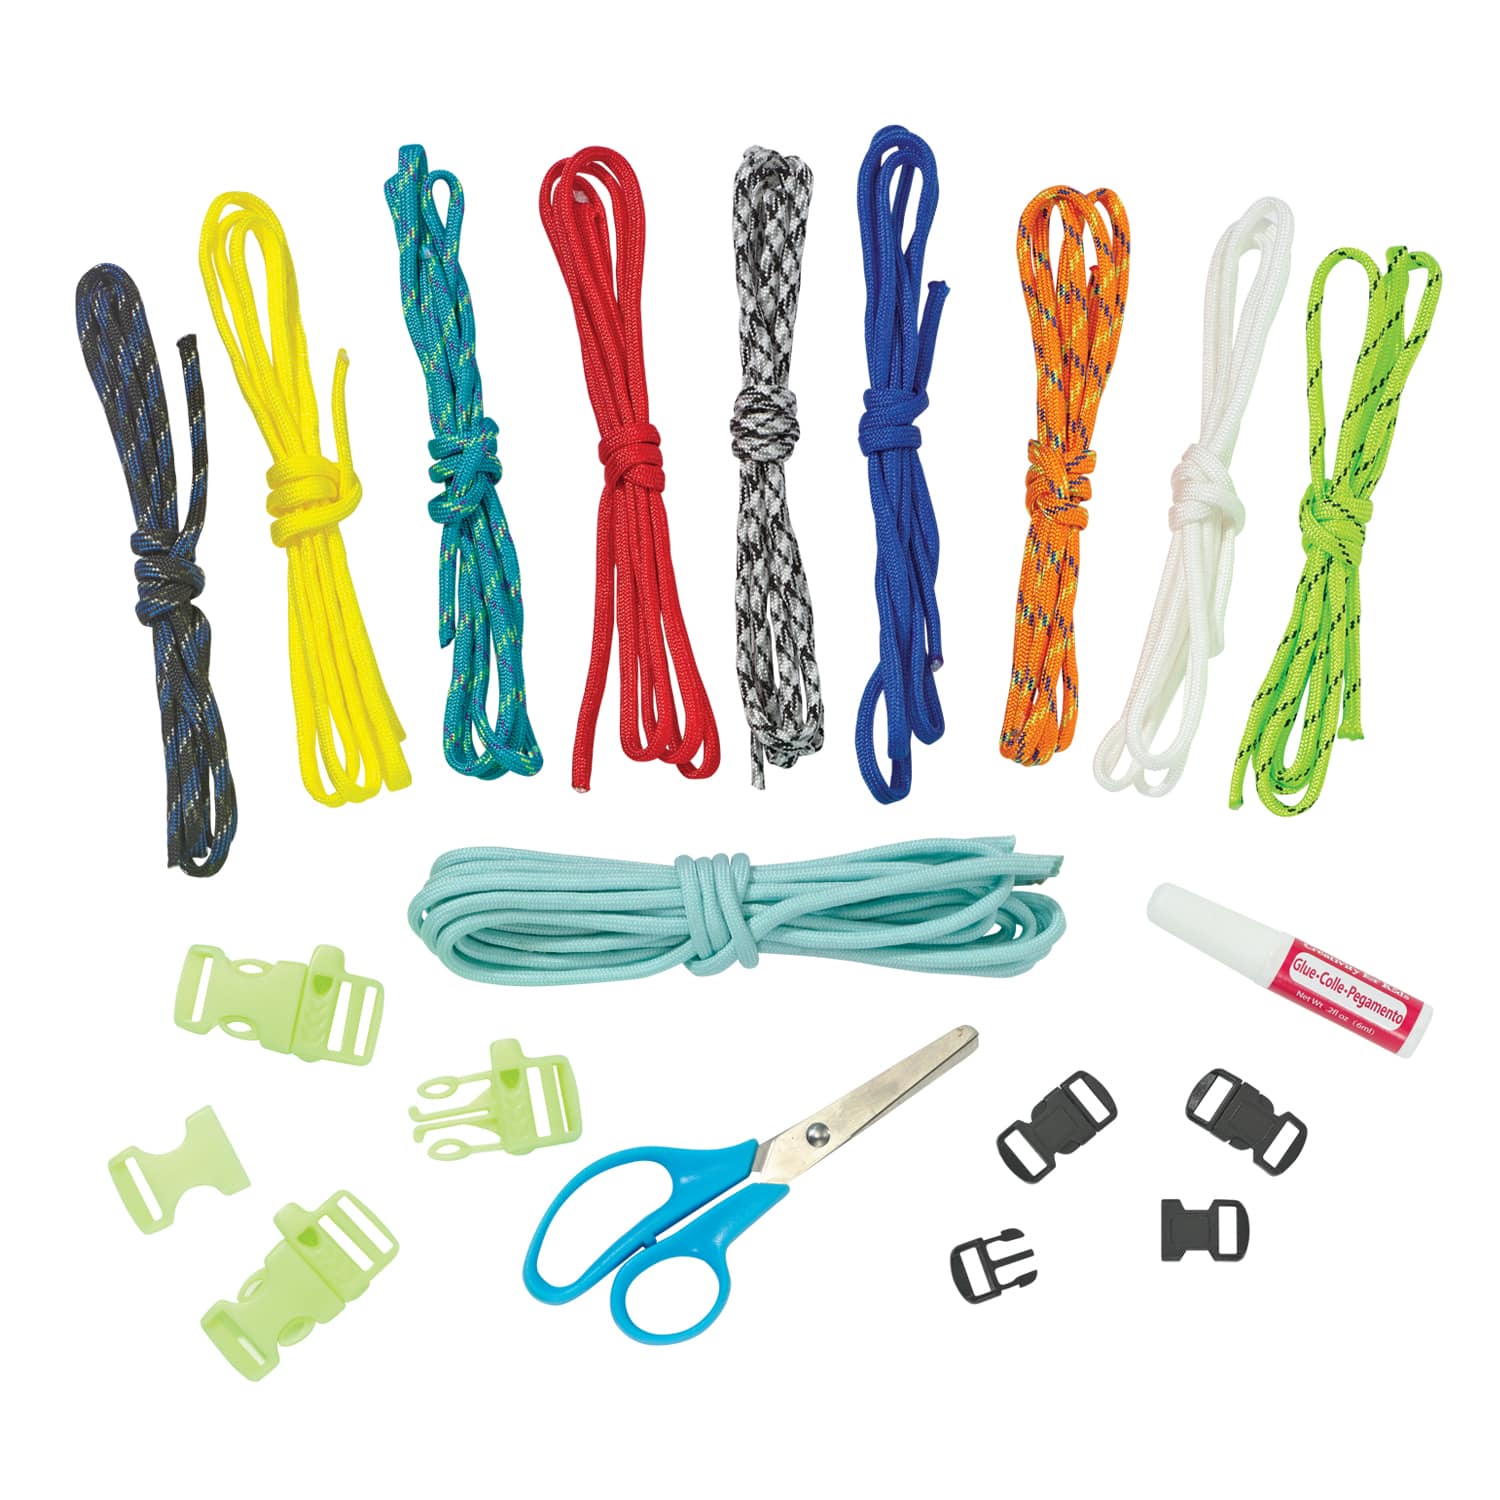 Make Your Own Paracord Bracelets With Charms Kit